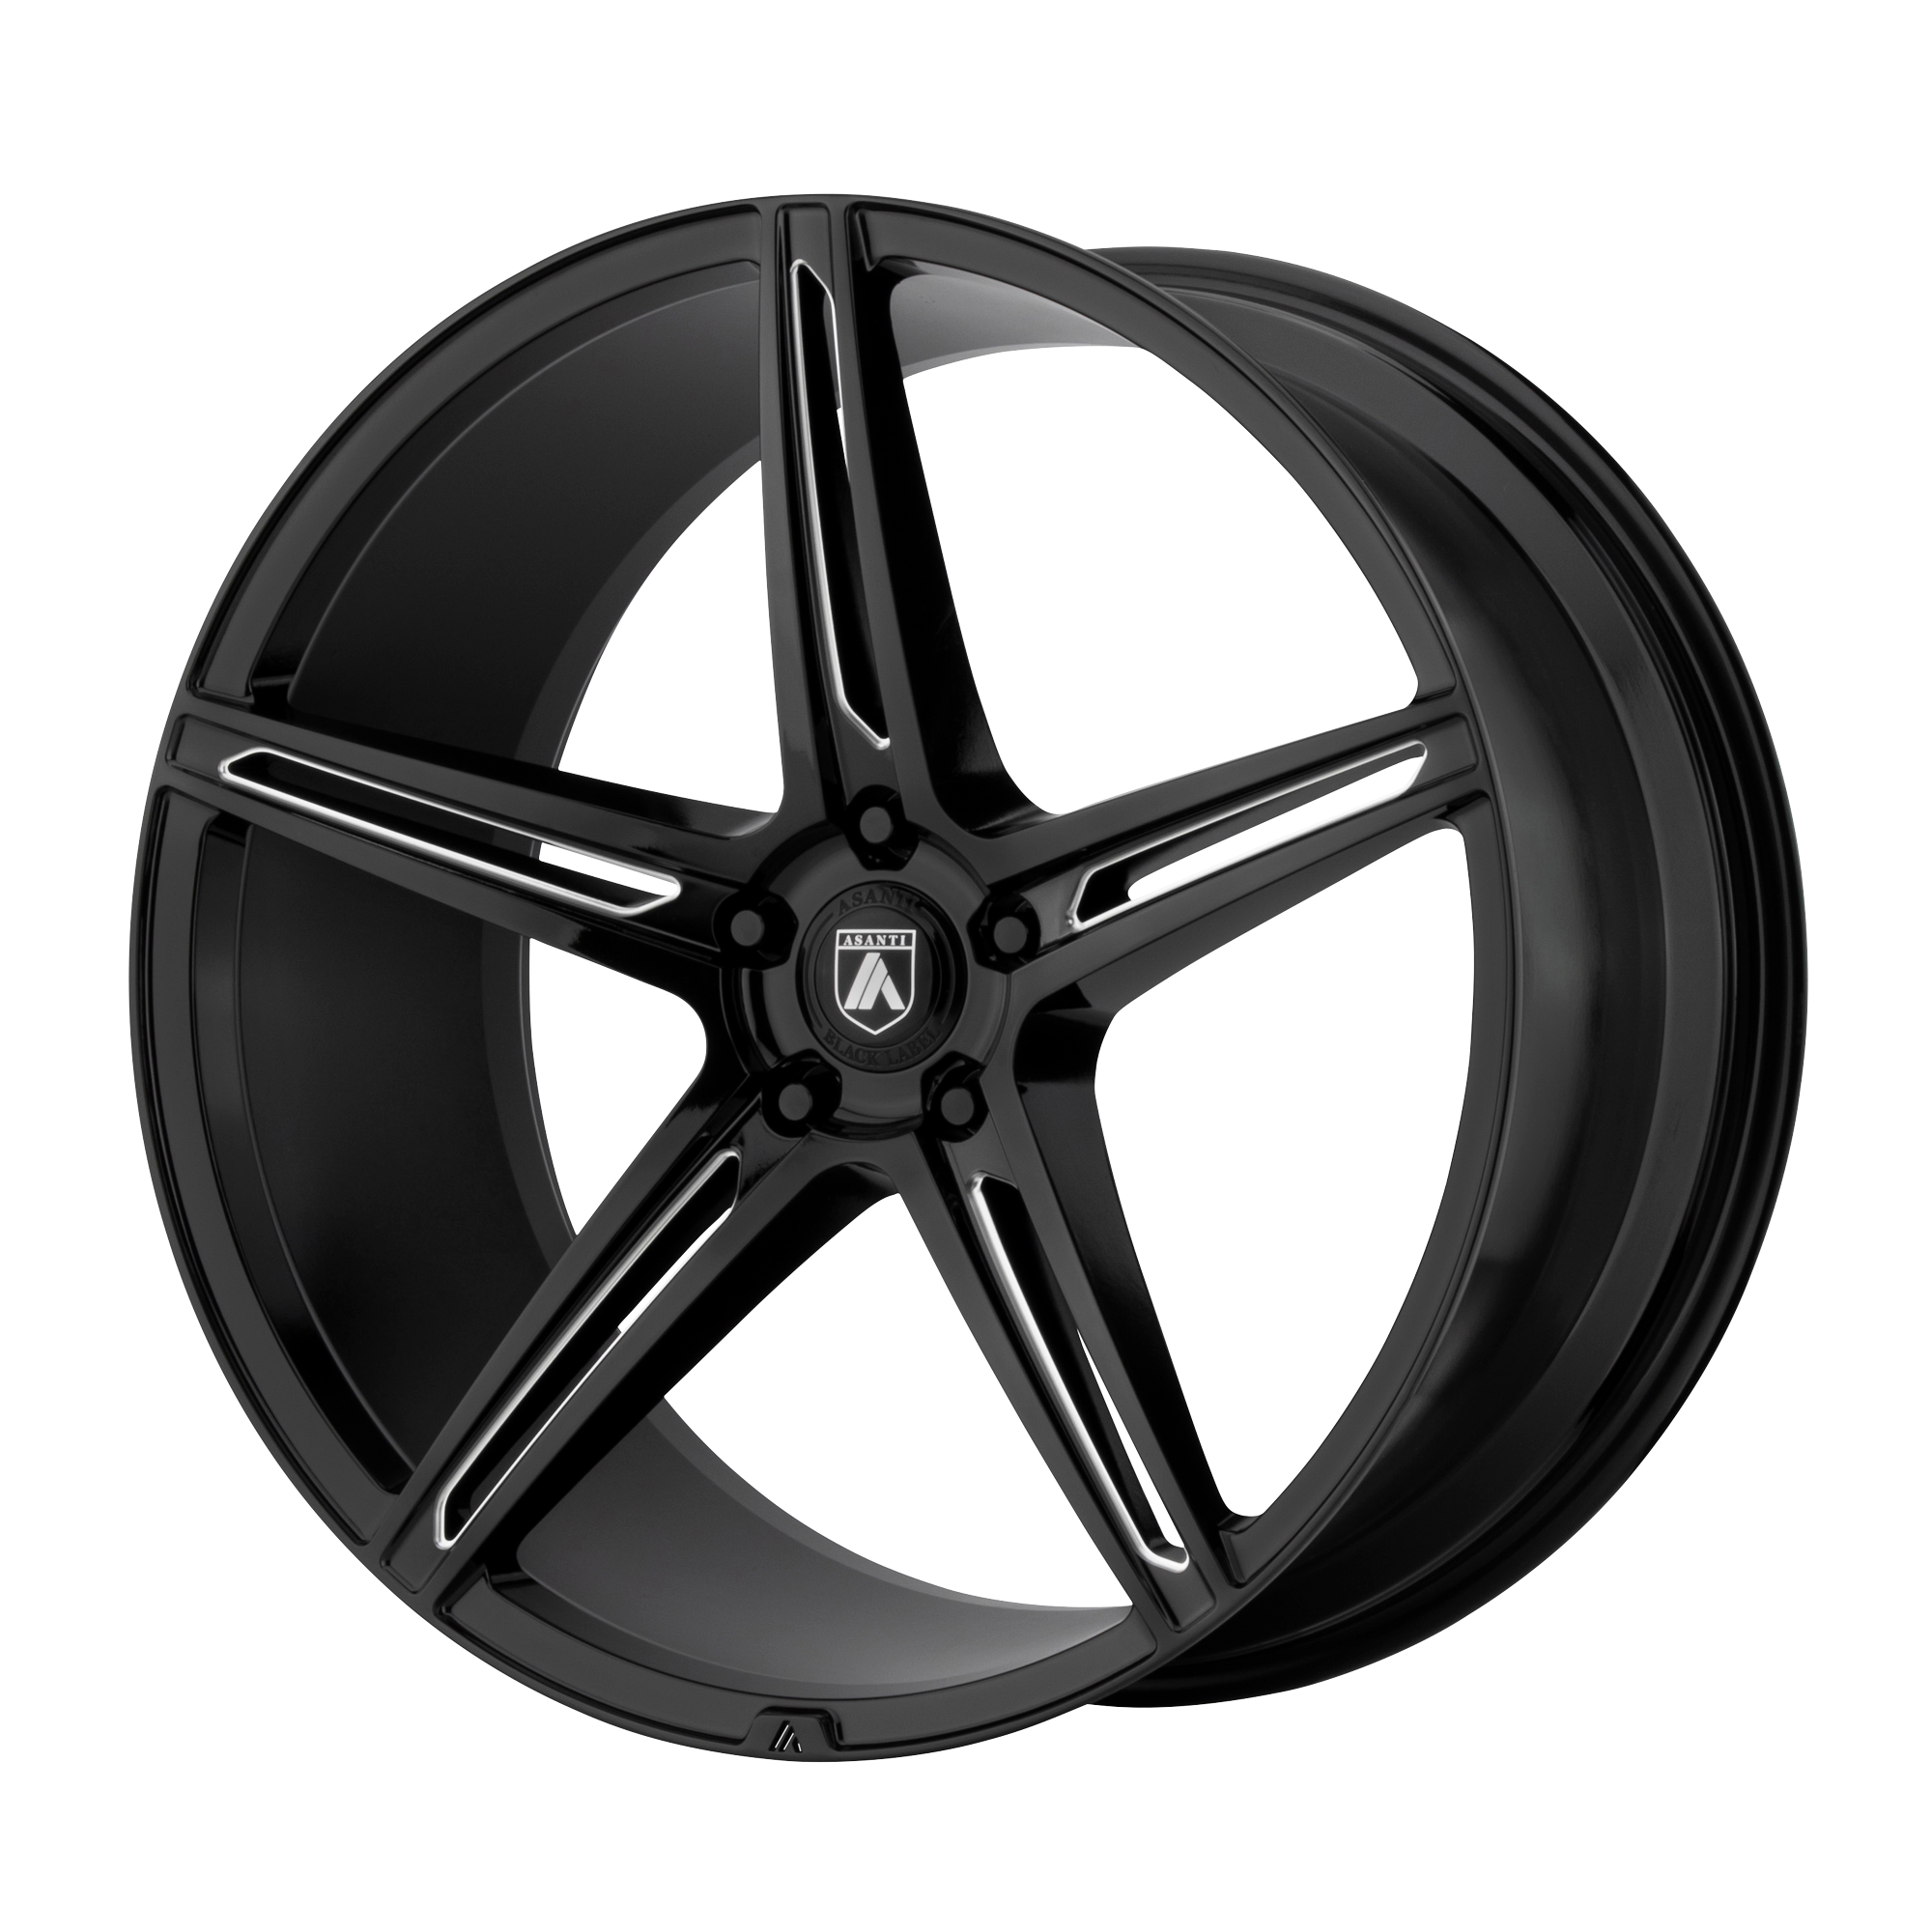 ALPHA 5 20x10.5 5x120.00 GLOSS BLACK MILLED (38 mm) - Tires and Engine Performance